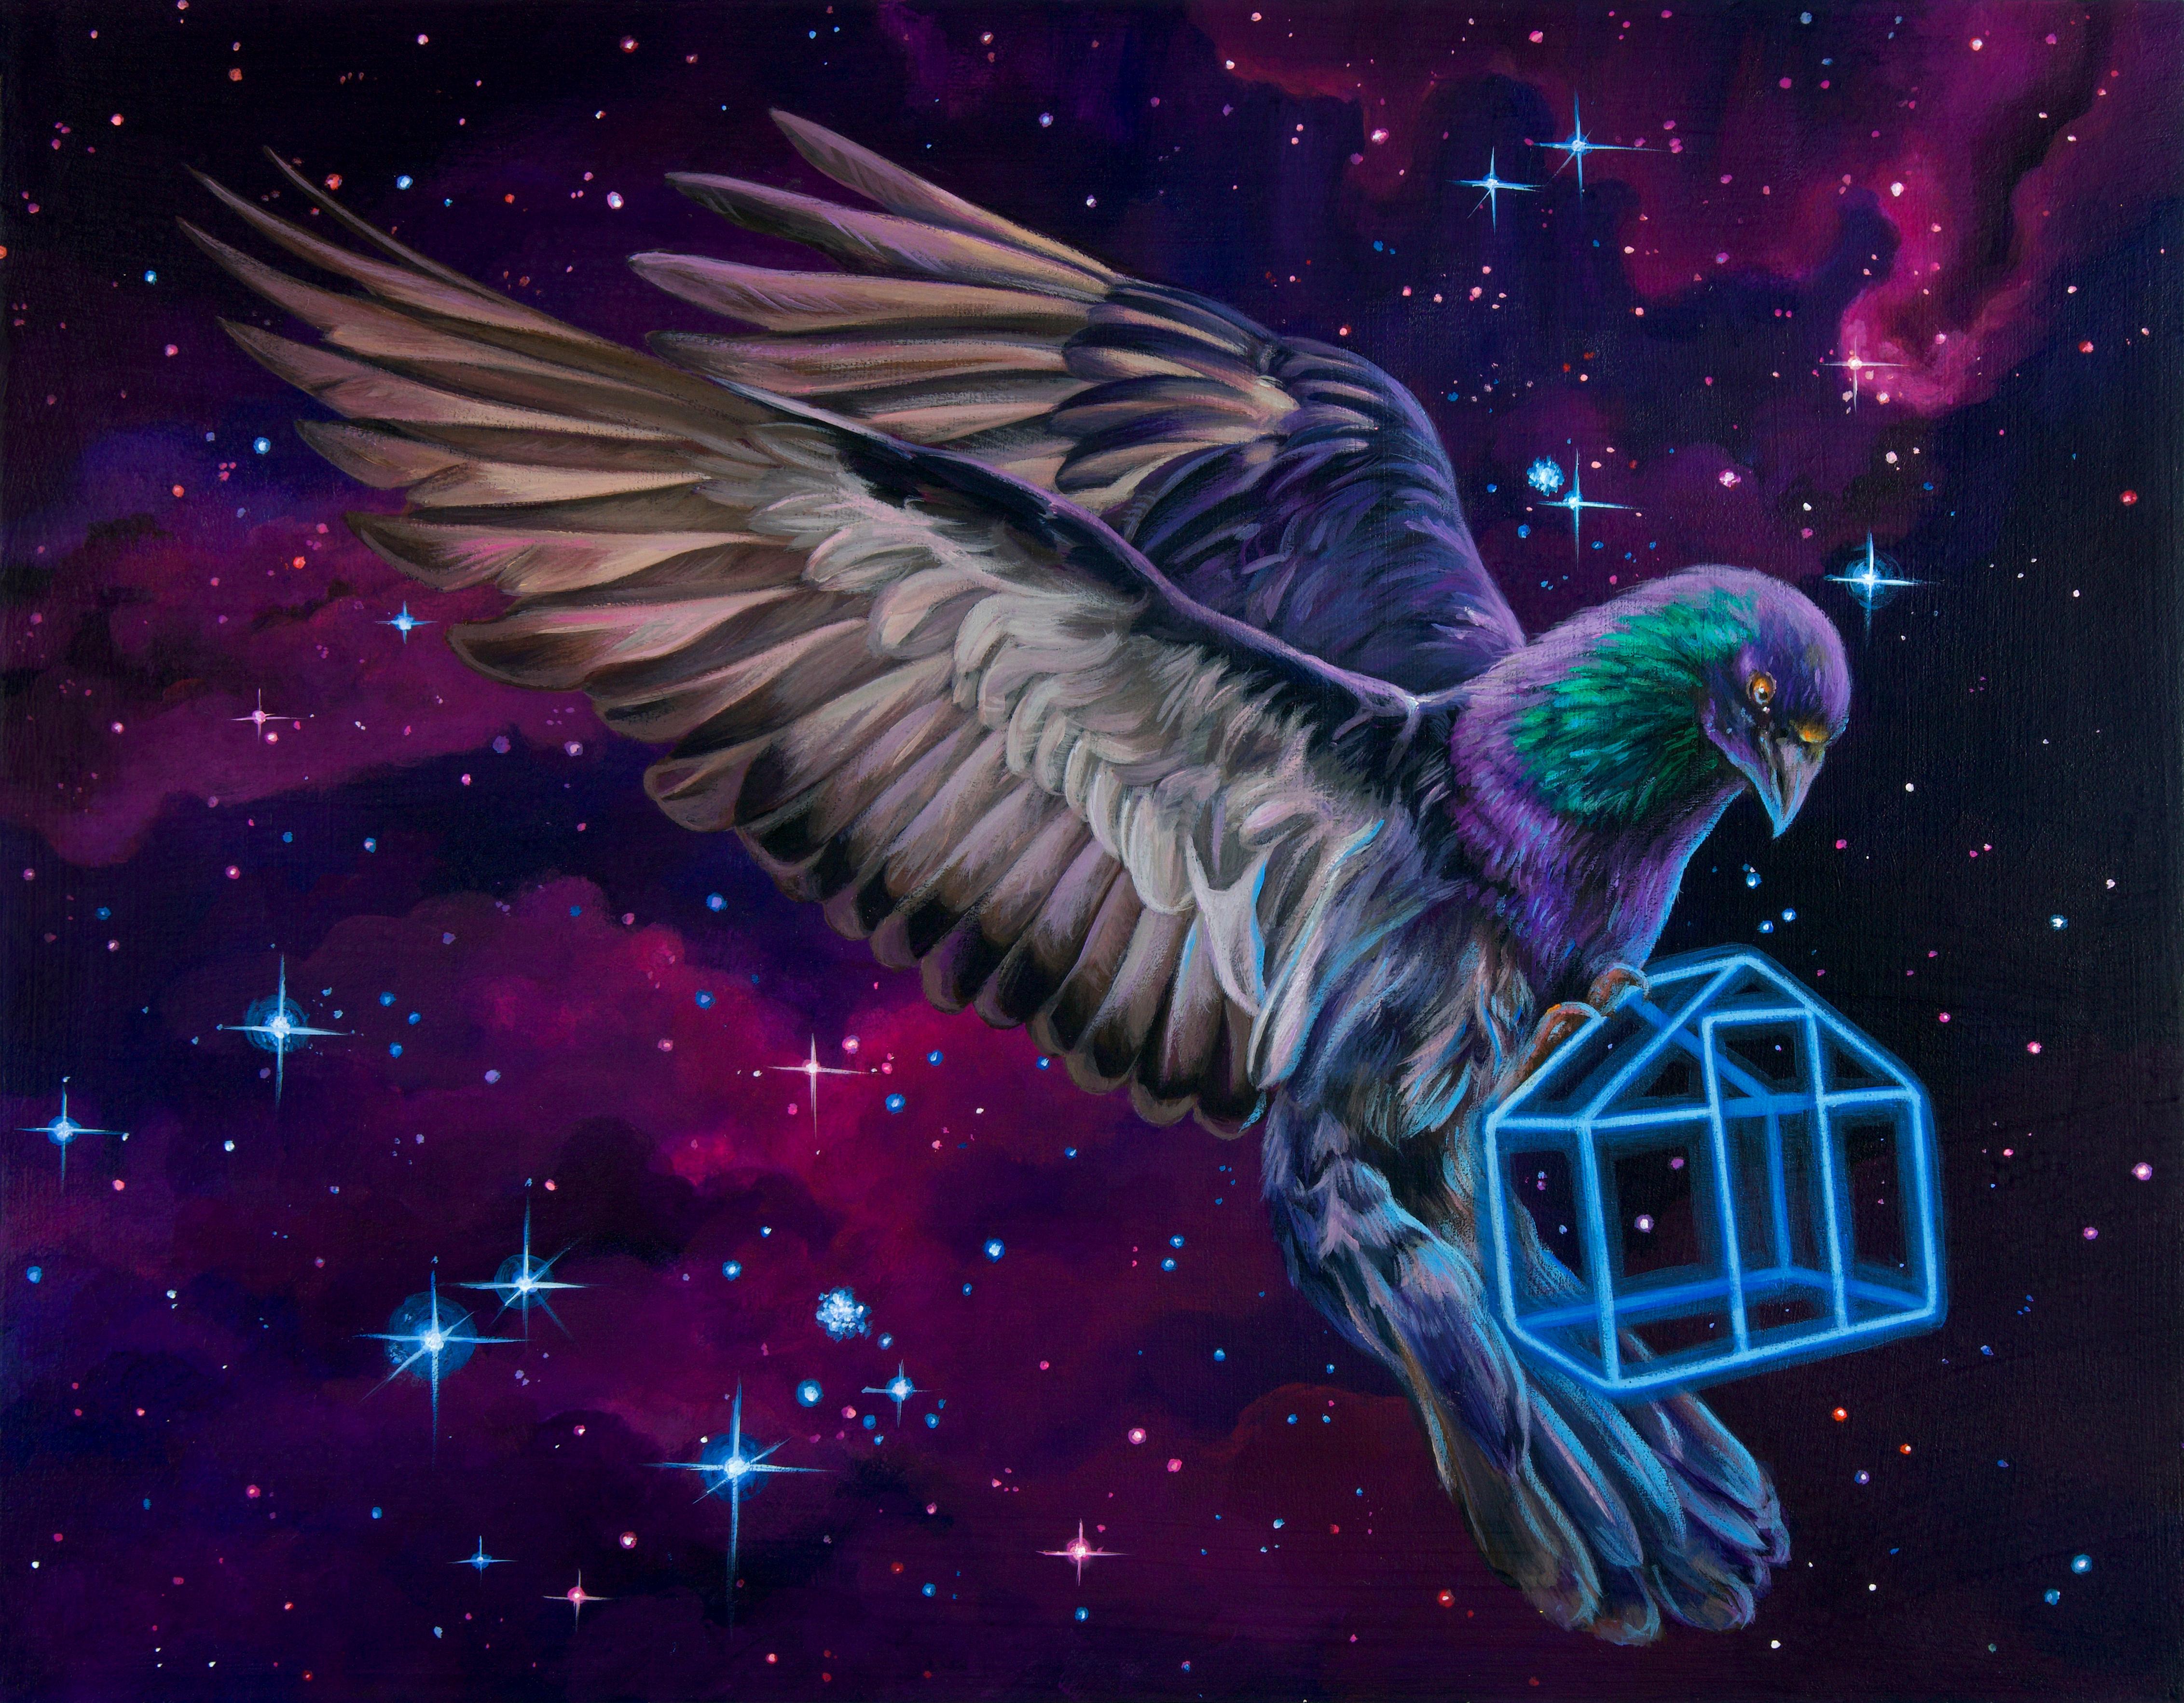 "Hold on Tight" by Gigi Chen, Acrylic Painting of Celestial Bird